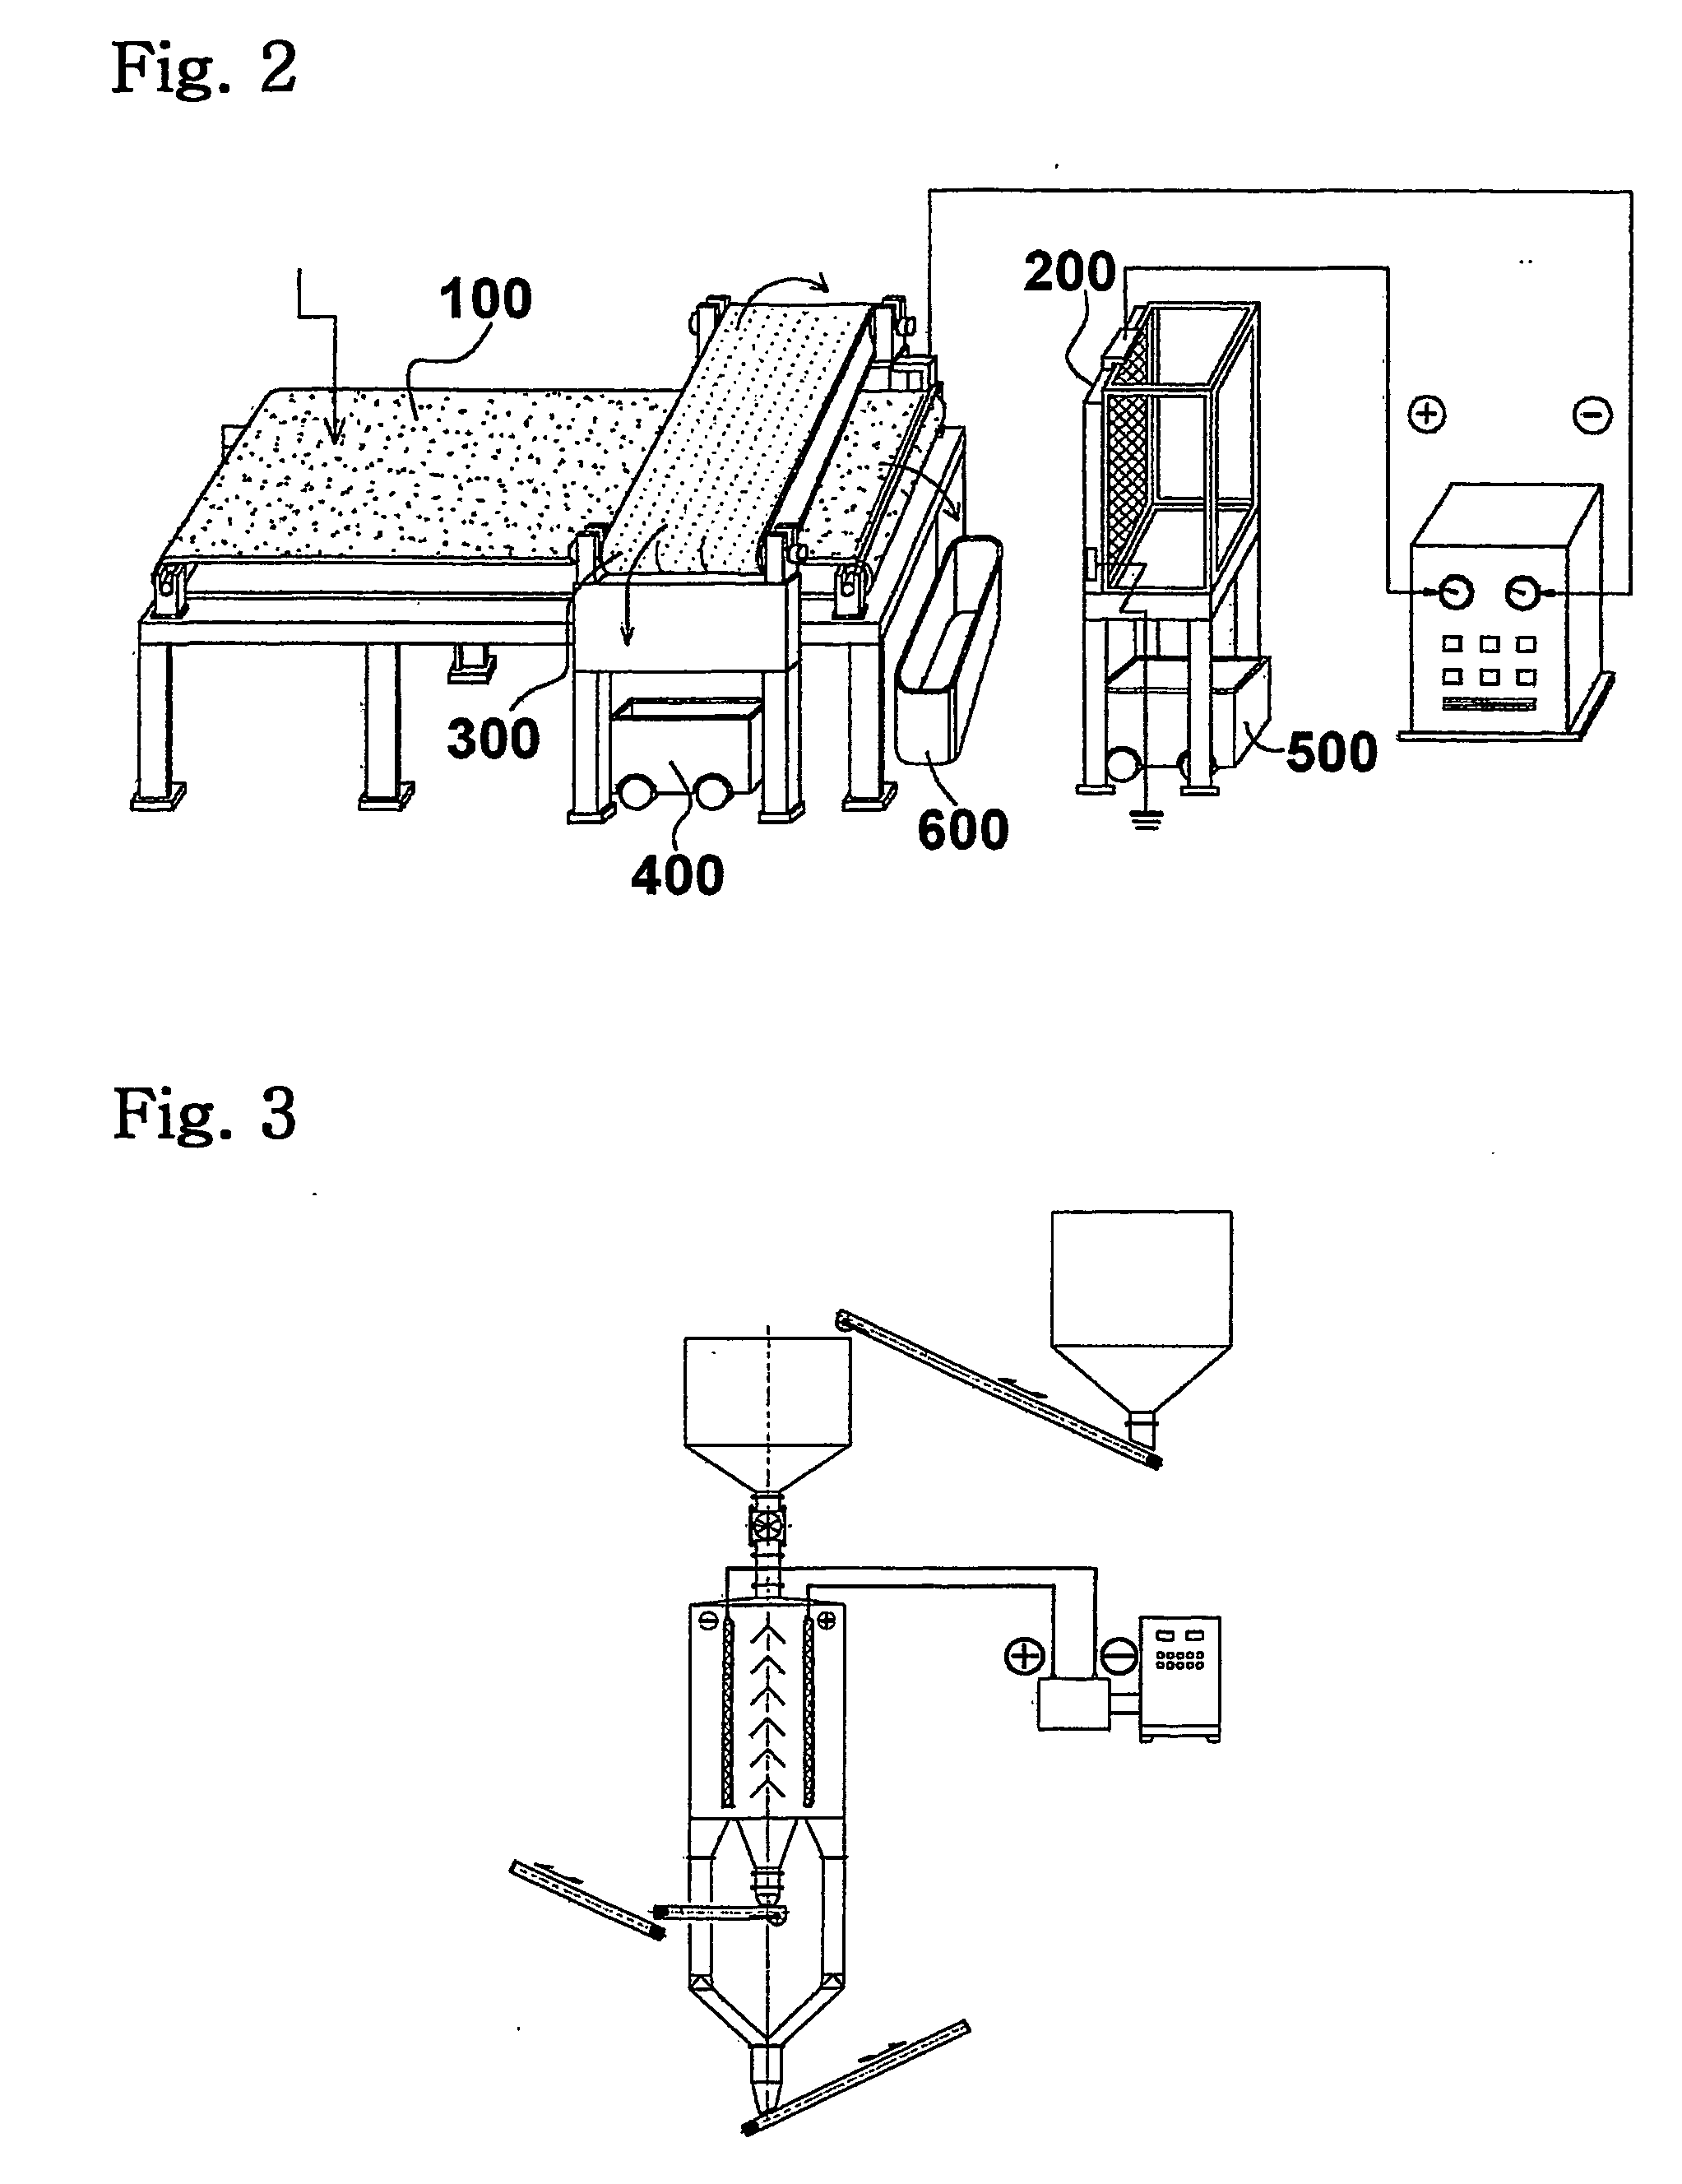 Electrostatic separation system for removal of fine metal from plastic